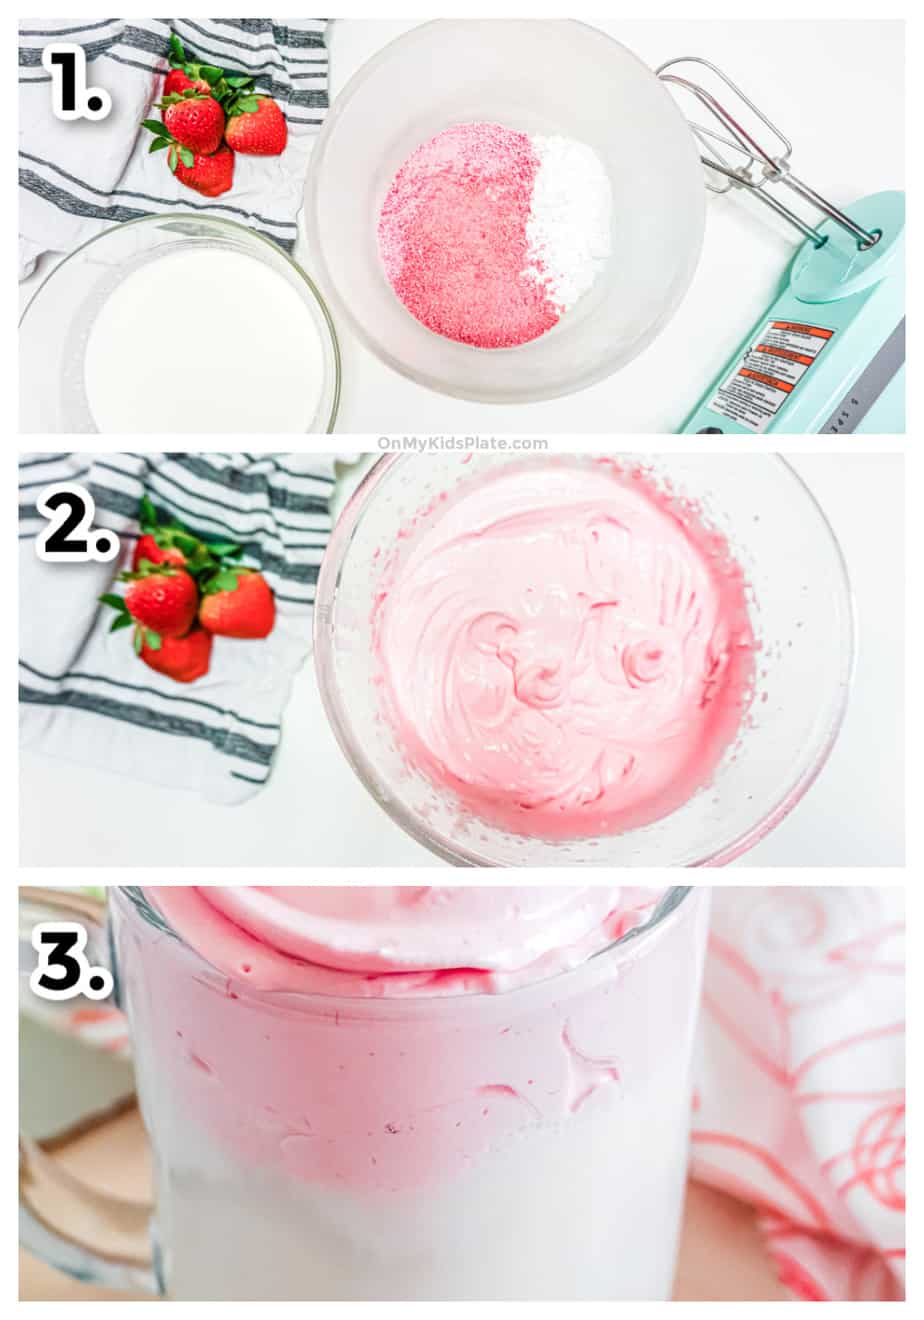 Step by step images mixing the strawberry and heavy whipping cream, whipping and toping the milk with whipped strawberry milk